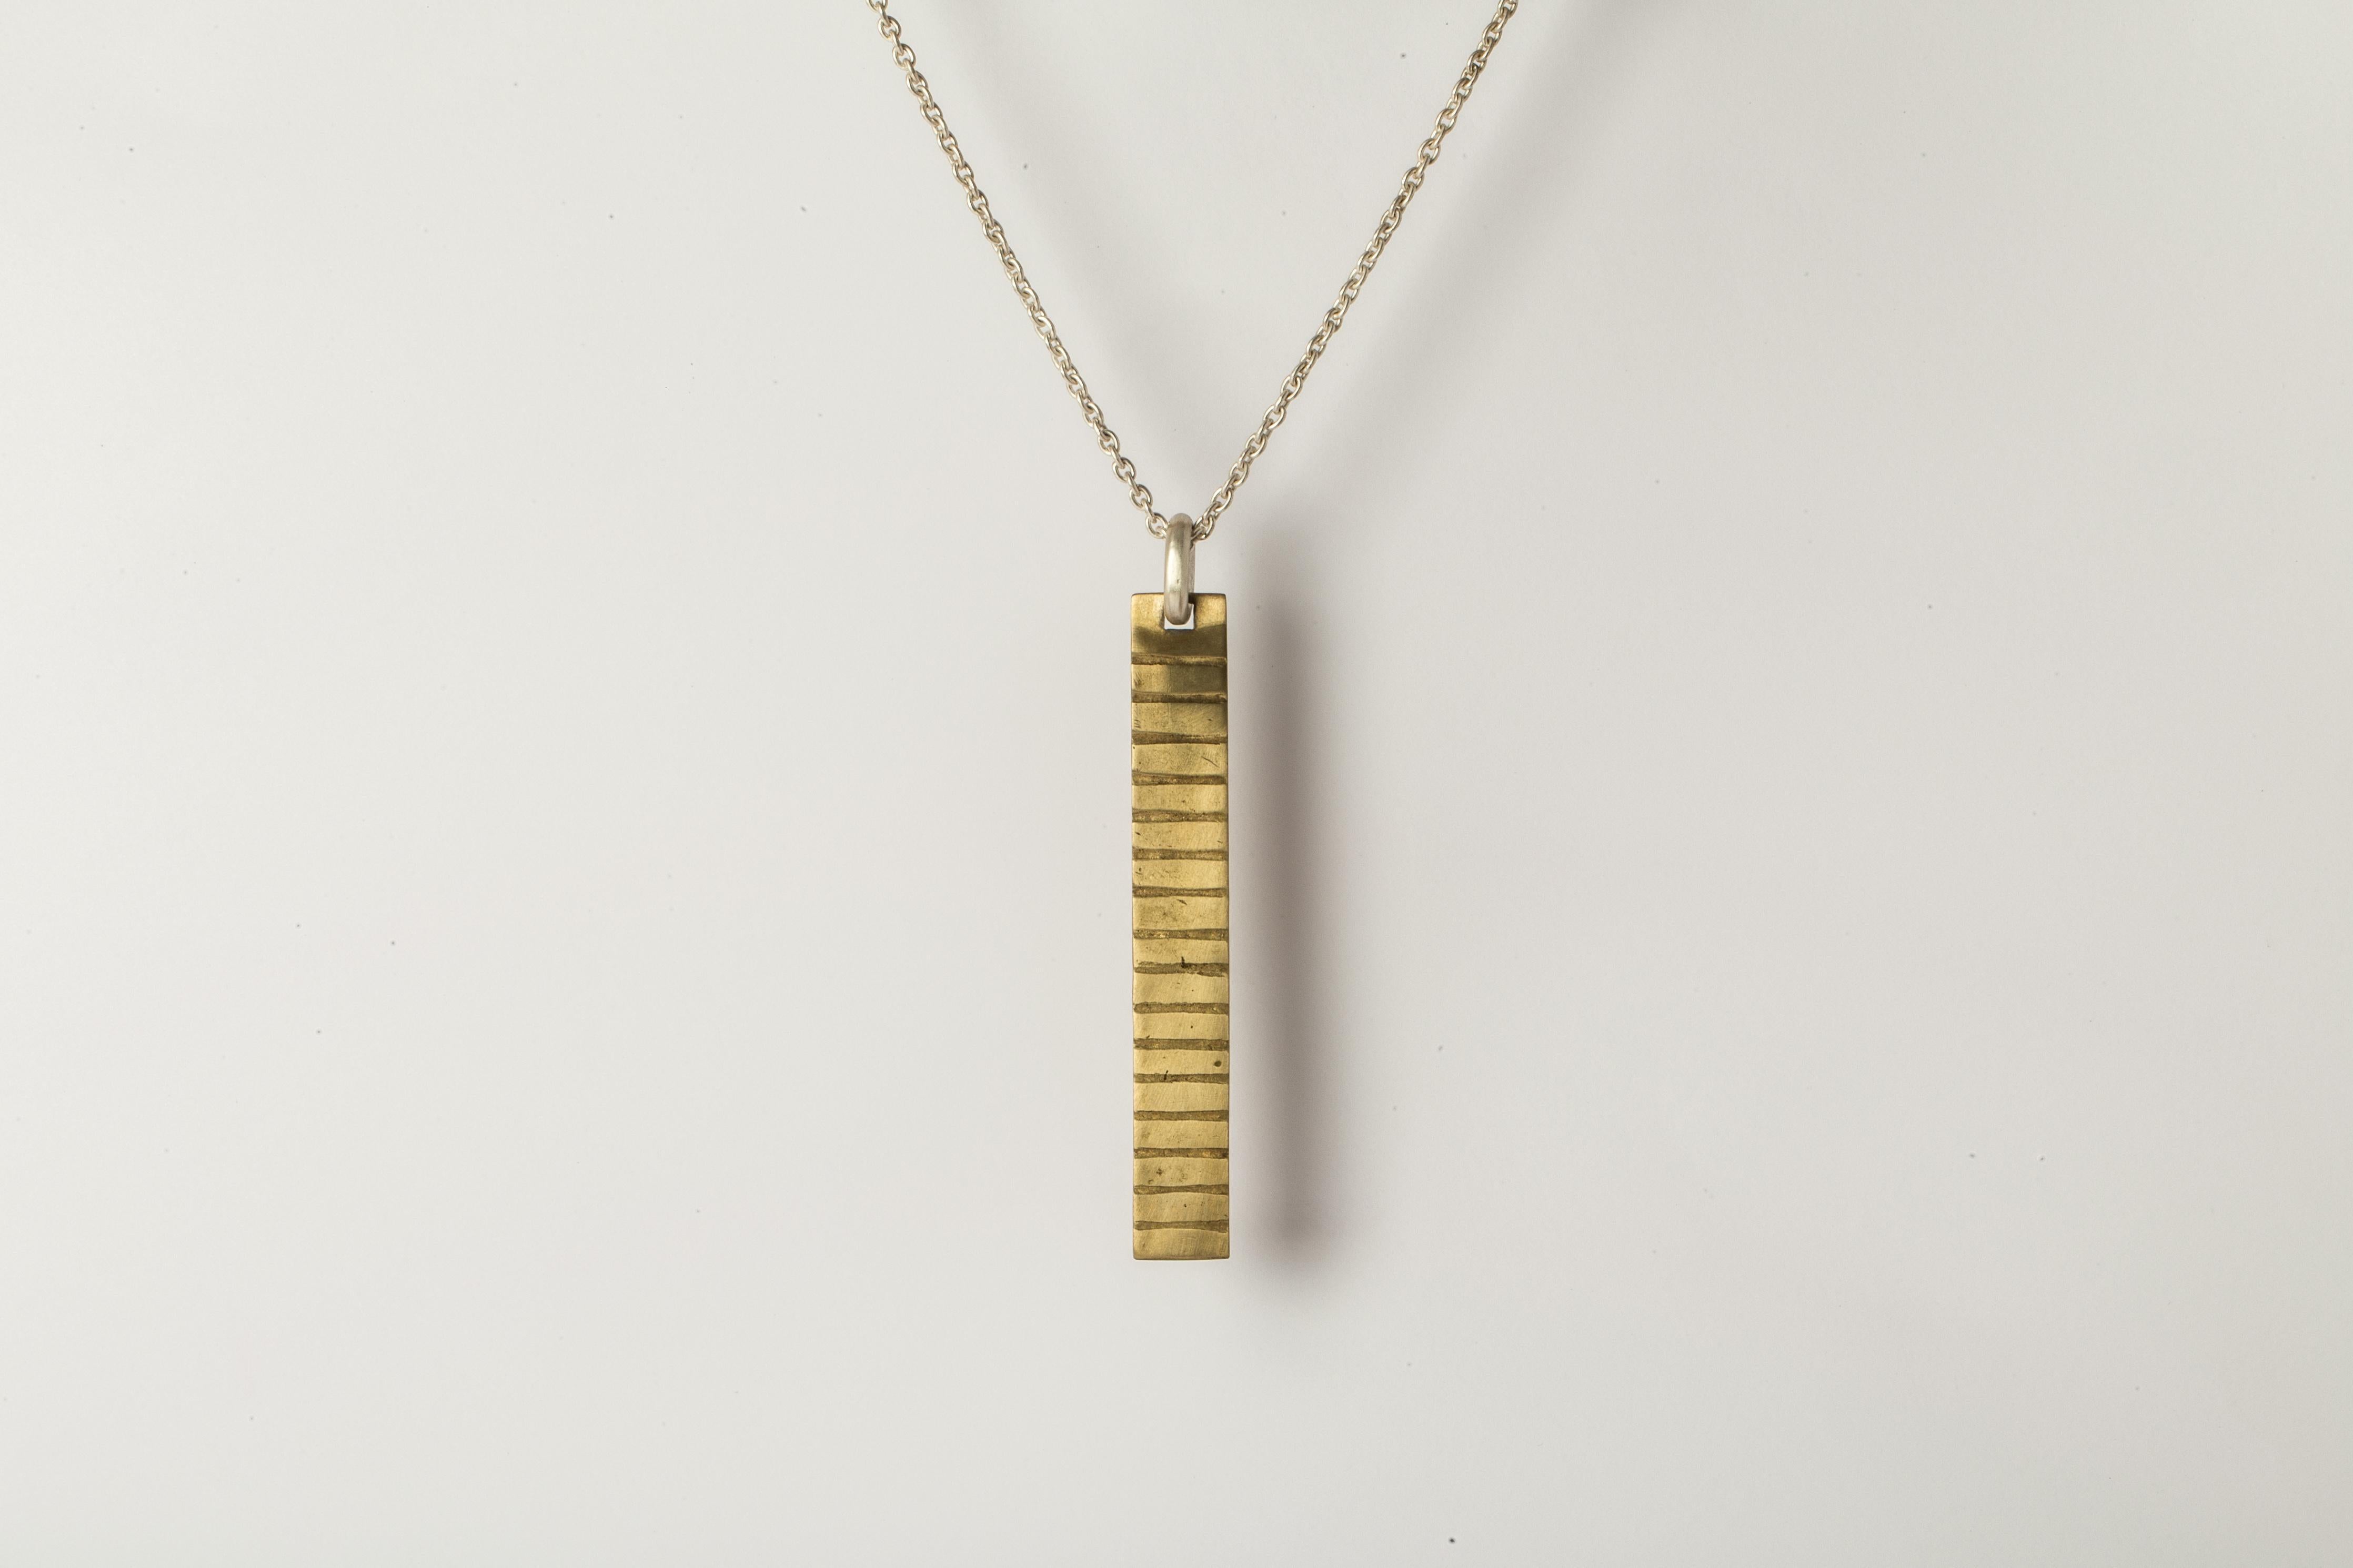 Plate necklace in brass, it comes on a 74cm sterling silver chain. The patterns or motifs on this piece are created using acid etching. An item is painted with a resistant material and the motif is scratched into the surface by hand. The entire